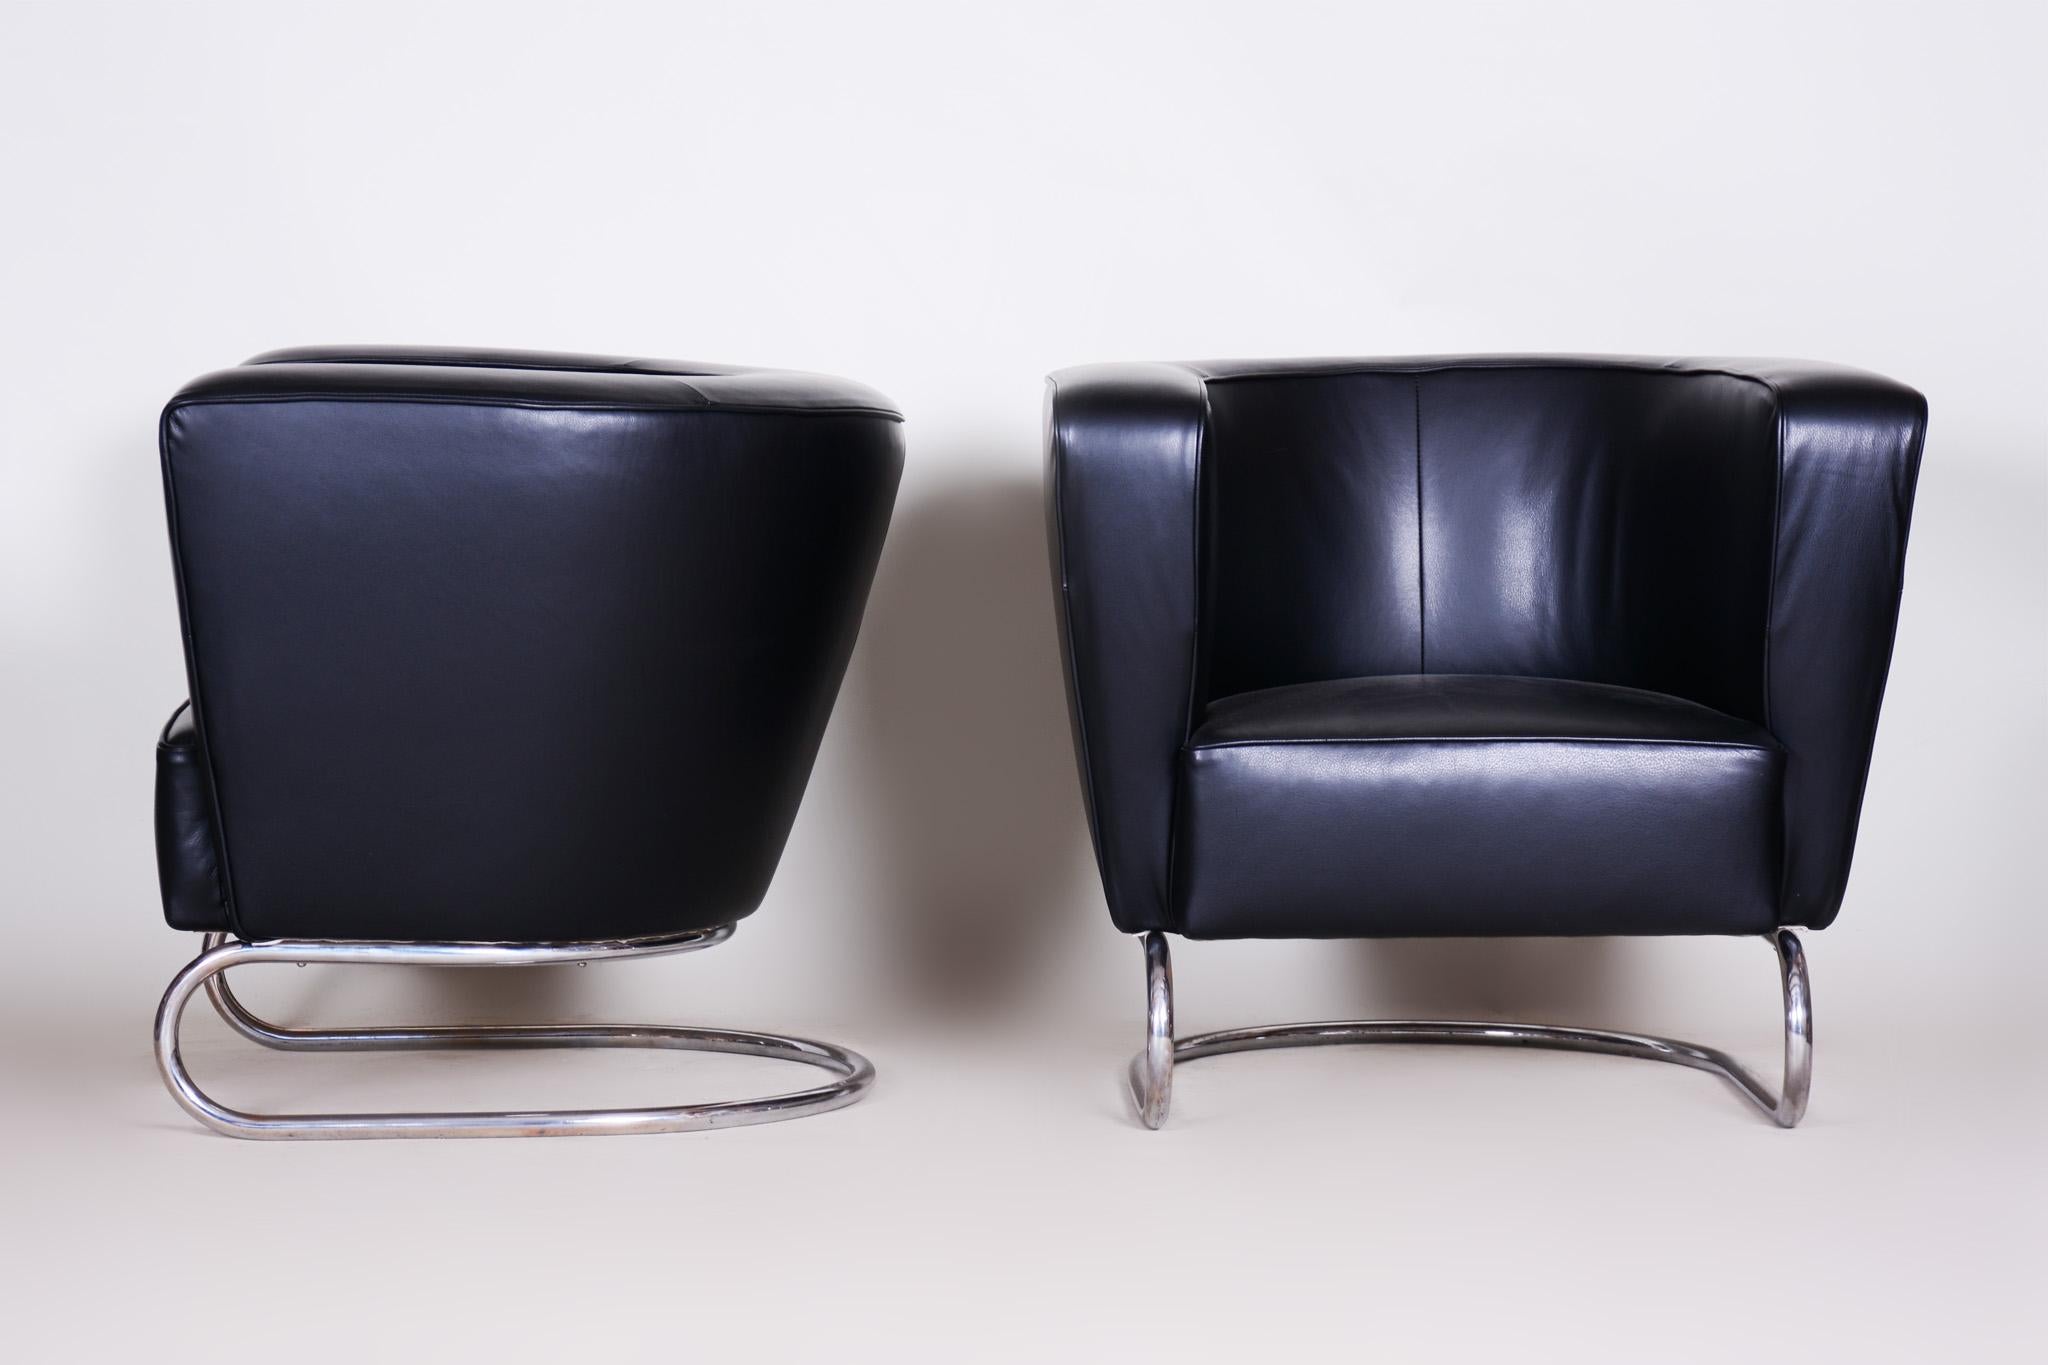 Pair of Black Art Deco Armchairs from Czechoslovakia by Jindrich Halabala, 1930s For Sale 1